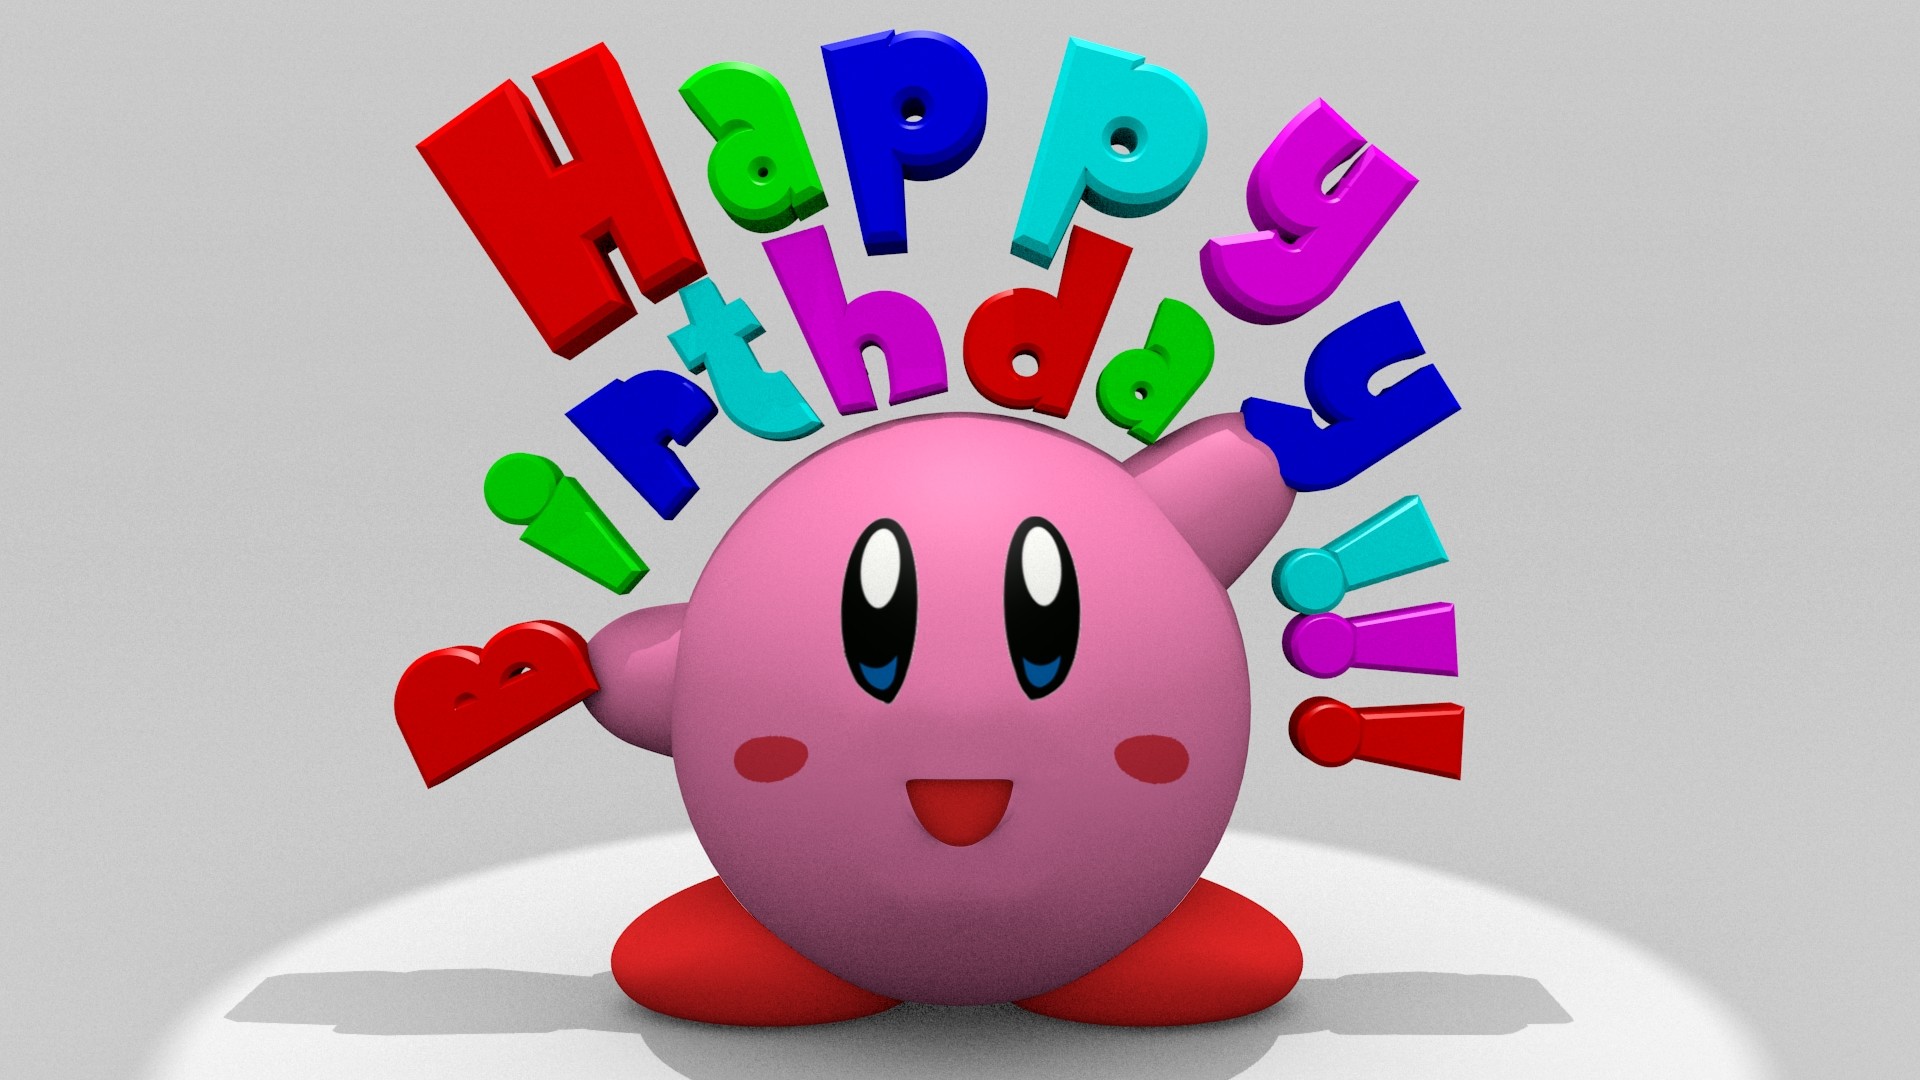 1920x1080 Kirby images kirby happy birth day HD wallpaper and background photos